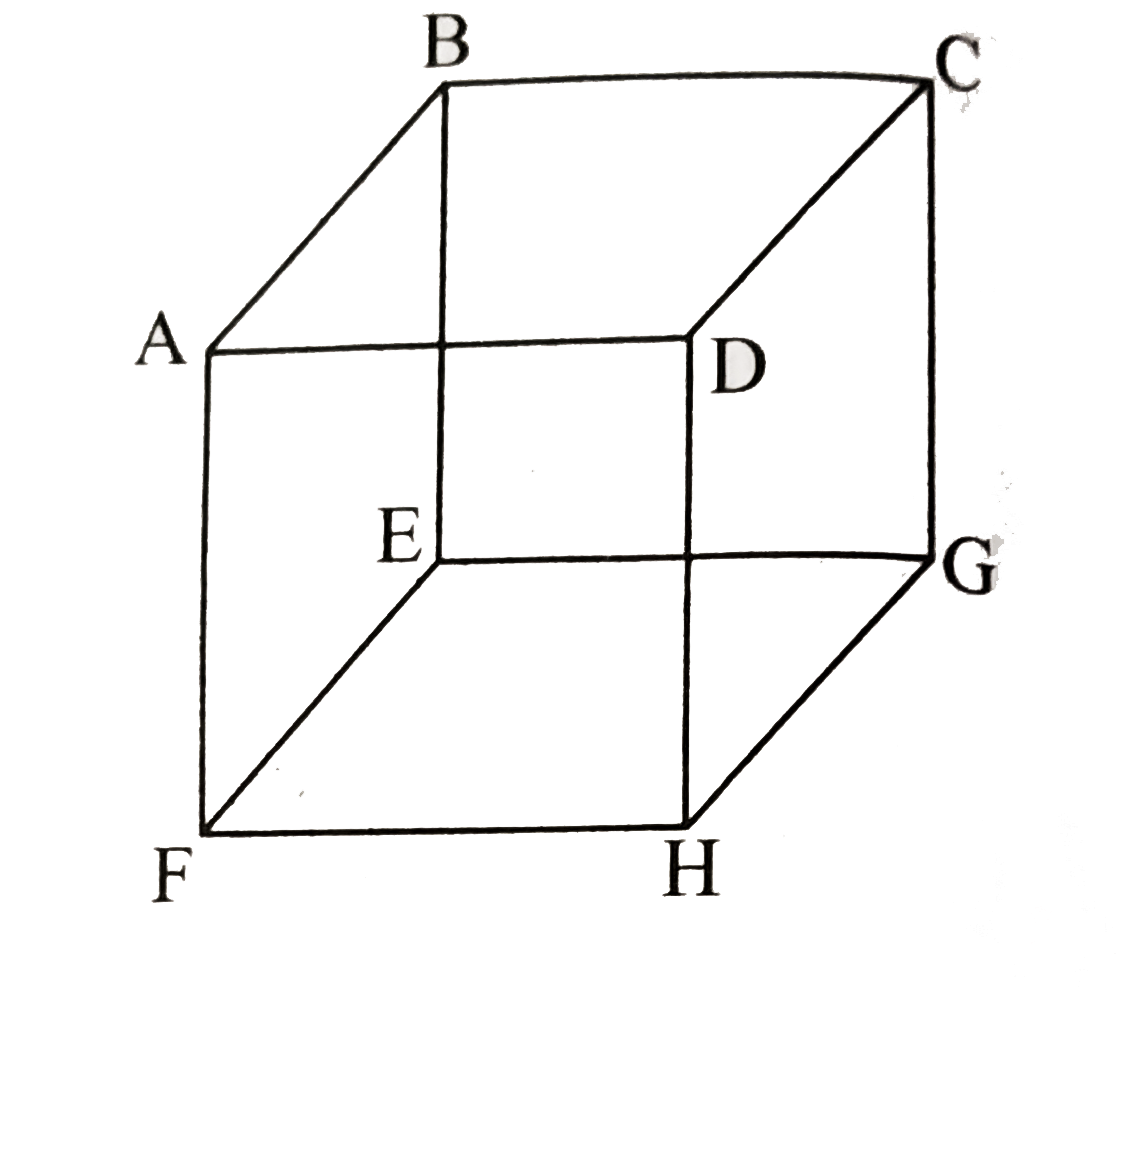 In the cubic lattice given below, the three distances between the atoms A-B, A-C, and A-G are, respectively,